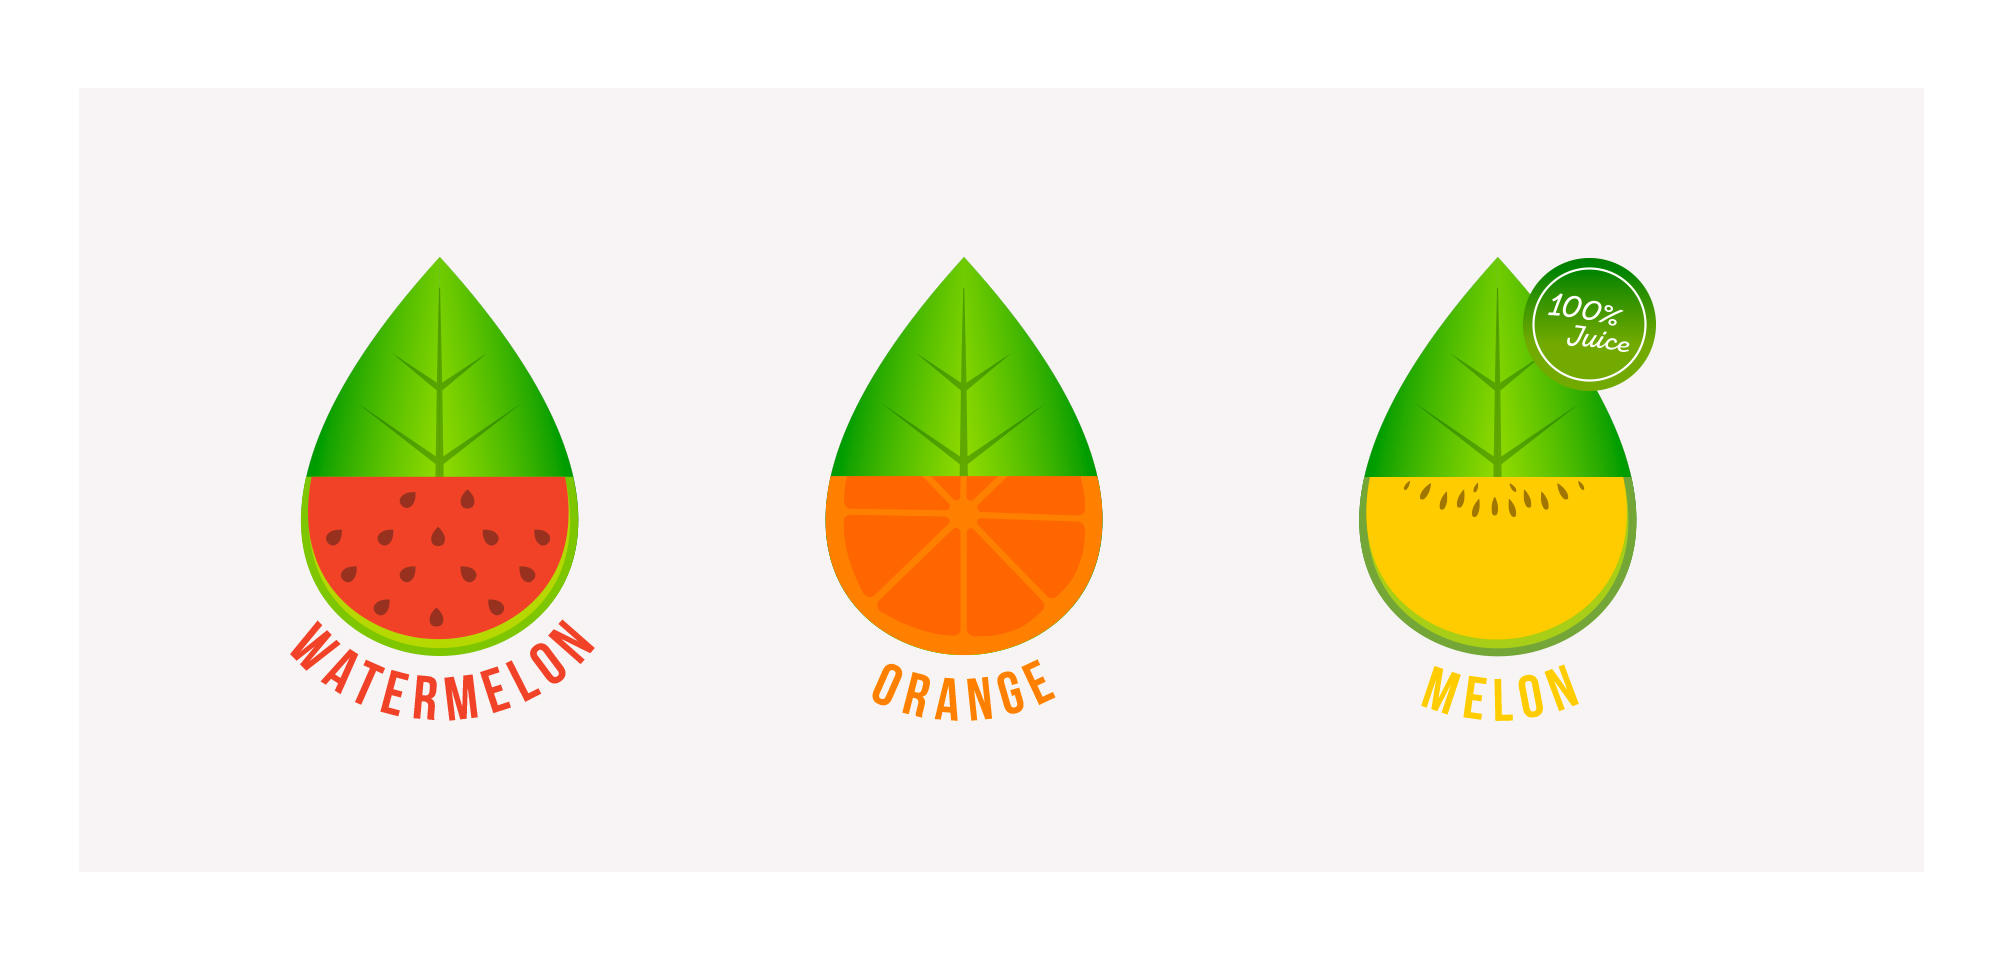 Logo proposal for the juices drinks